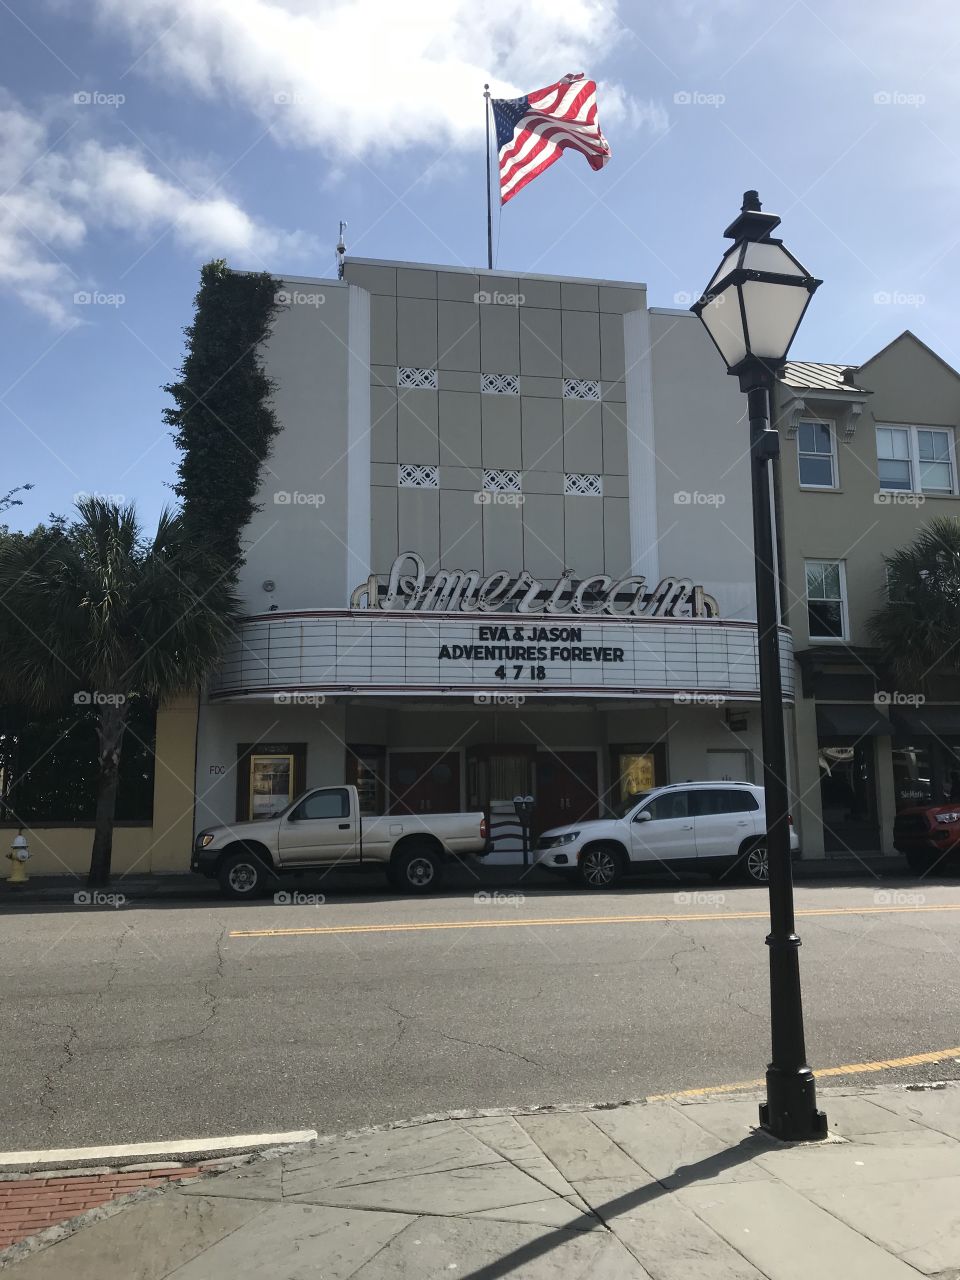 Movie theatre from ‘The Notebook’. Charleston NC